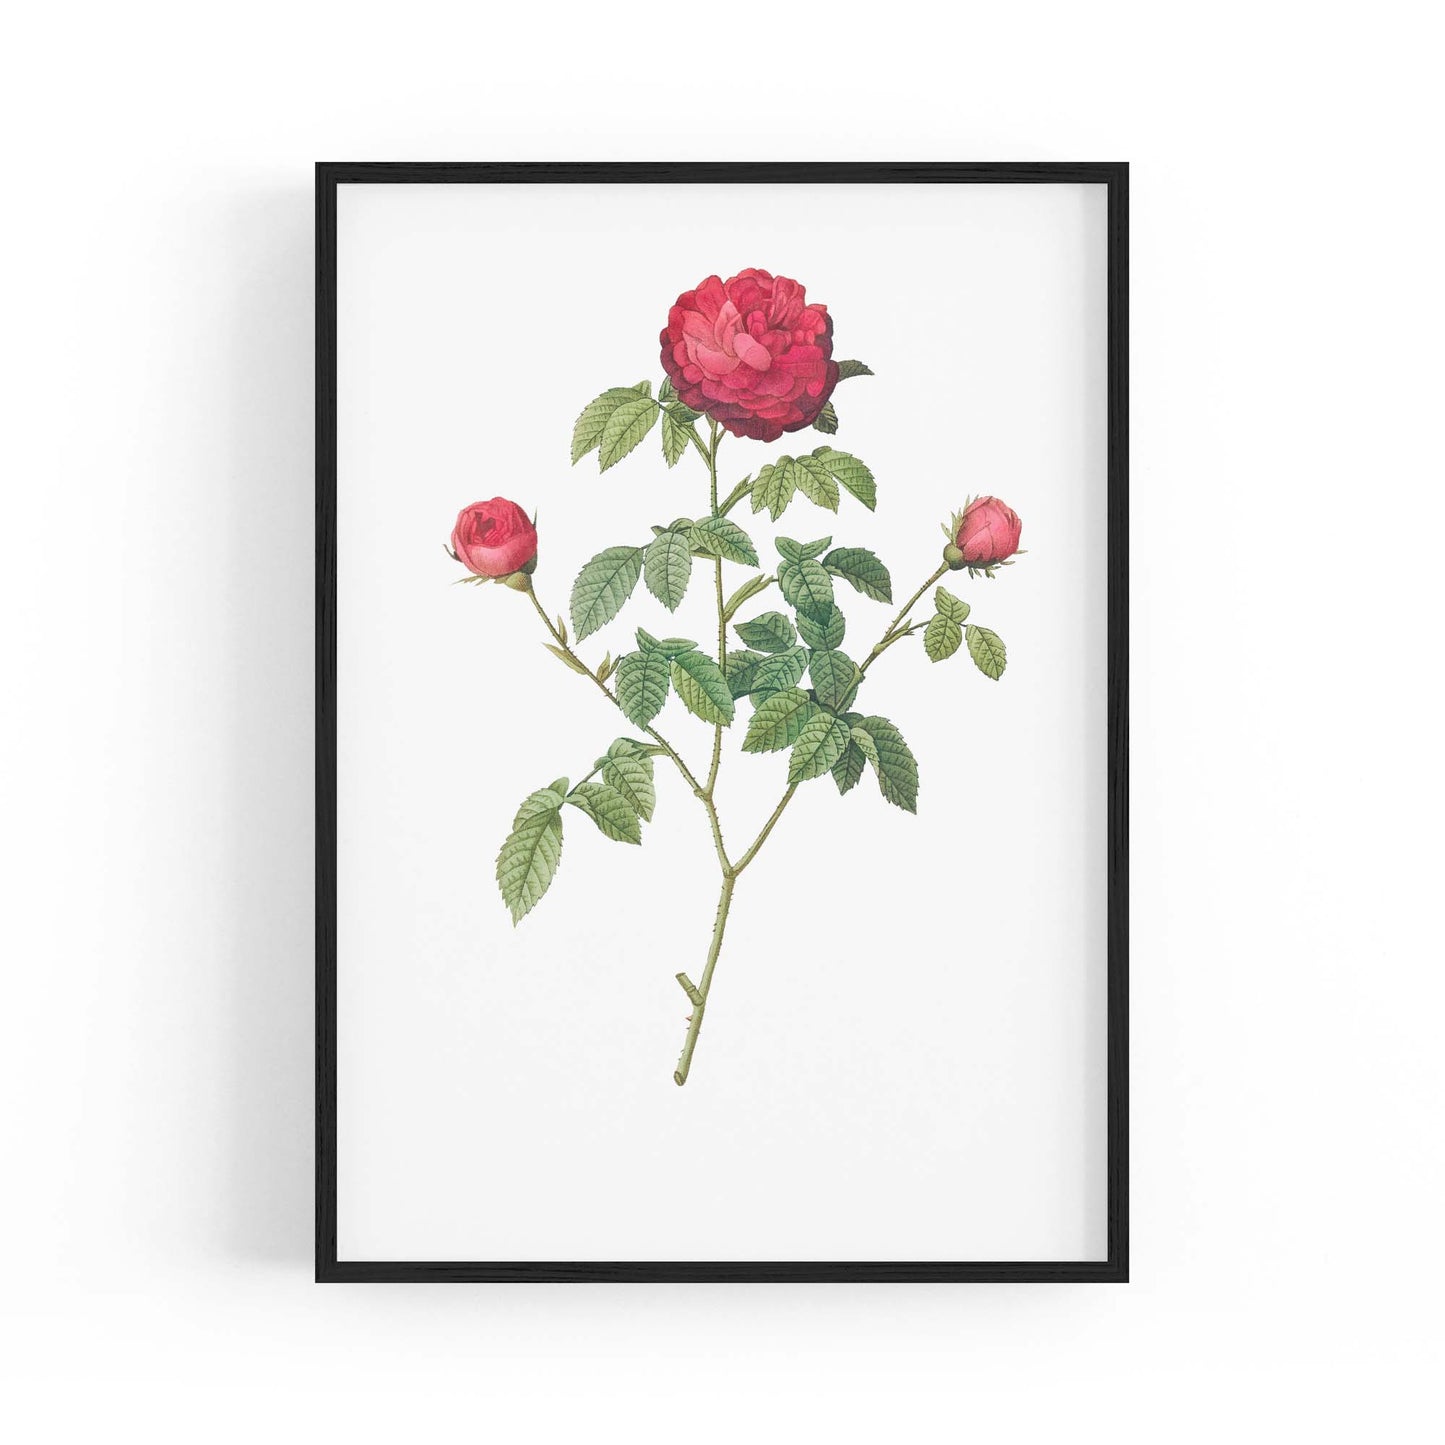 Flower Botanical Painting Kitchen Hallway Wall Art #3 - The Affordable Art Company